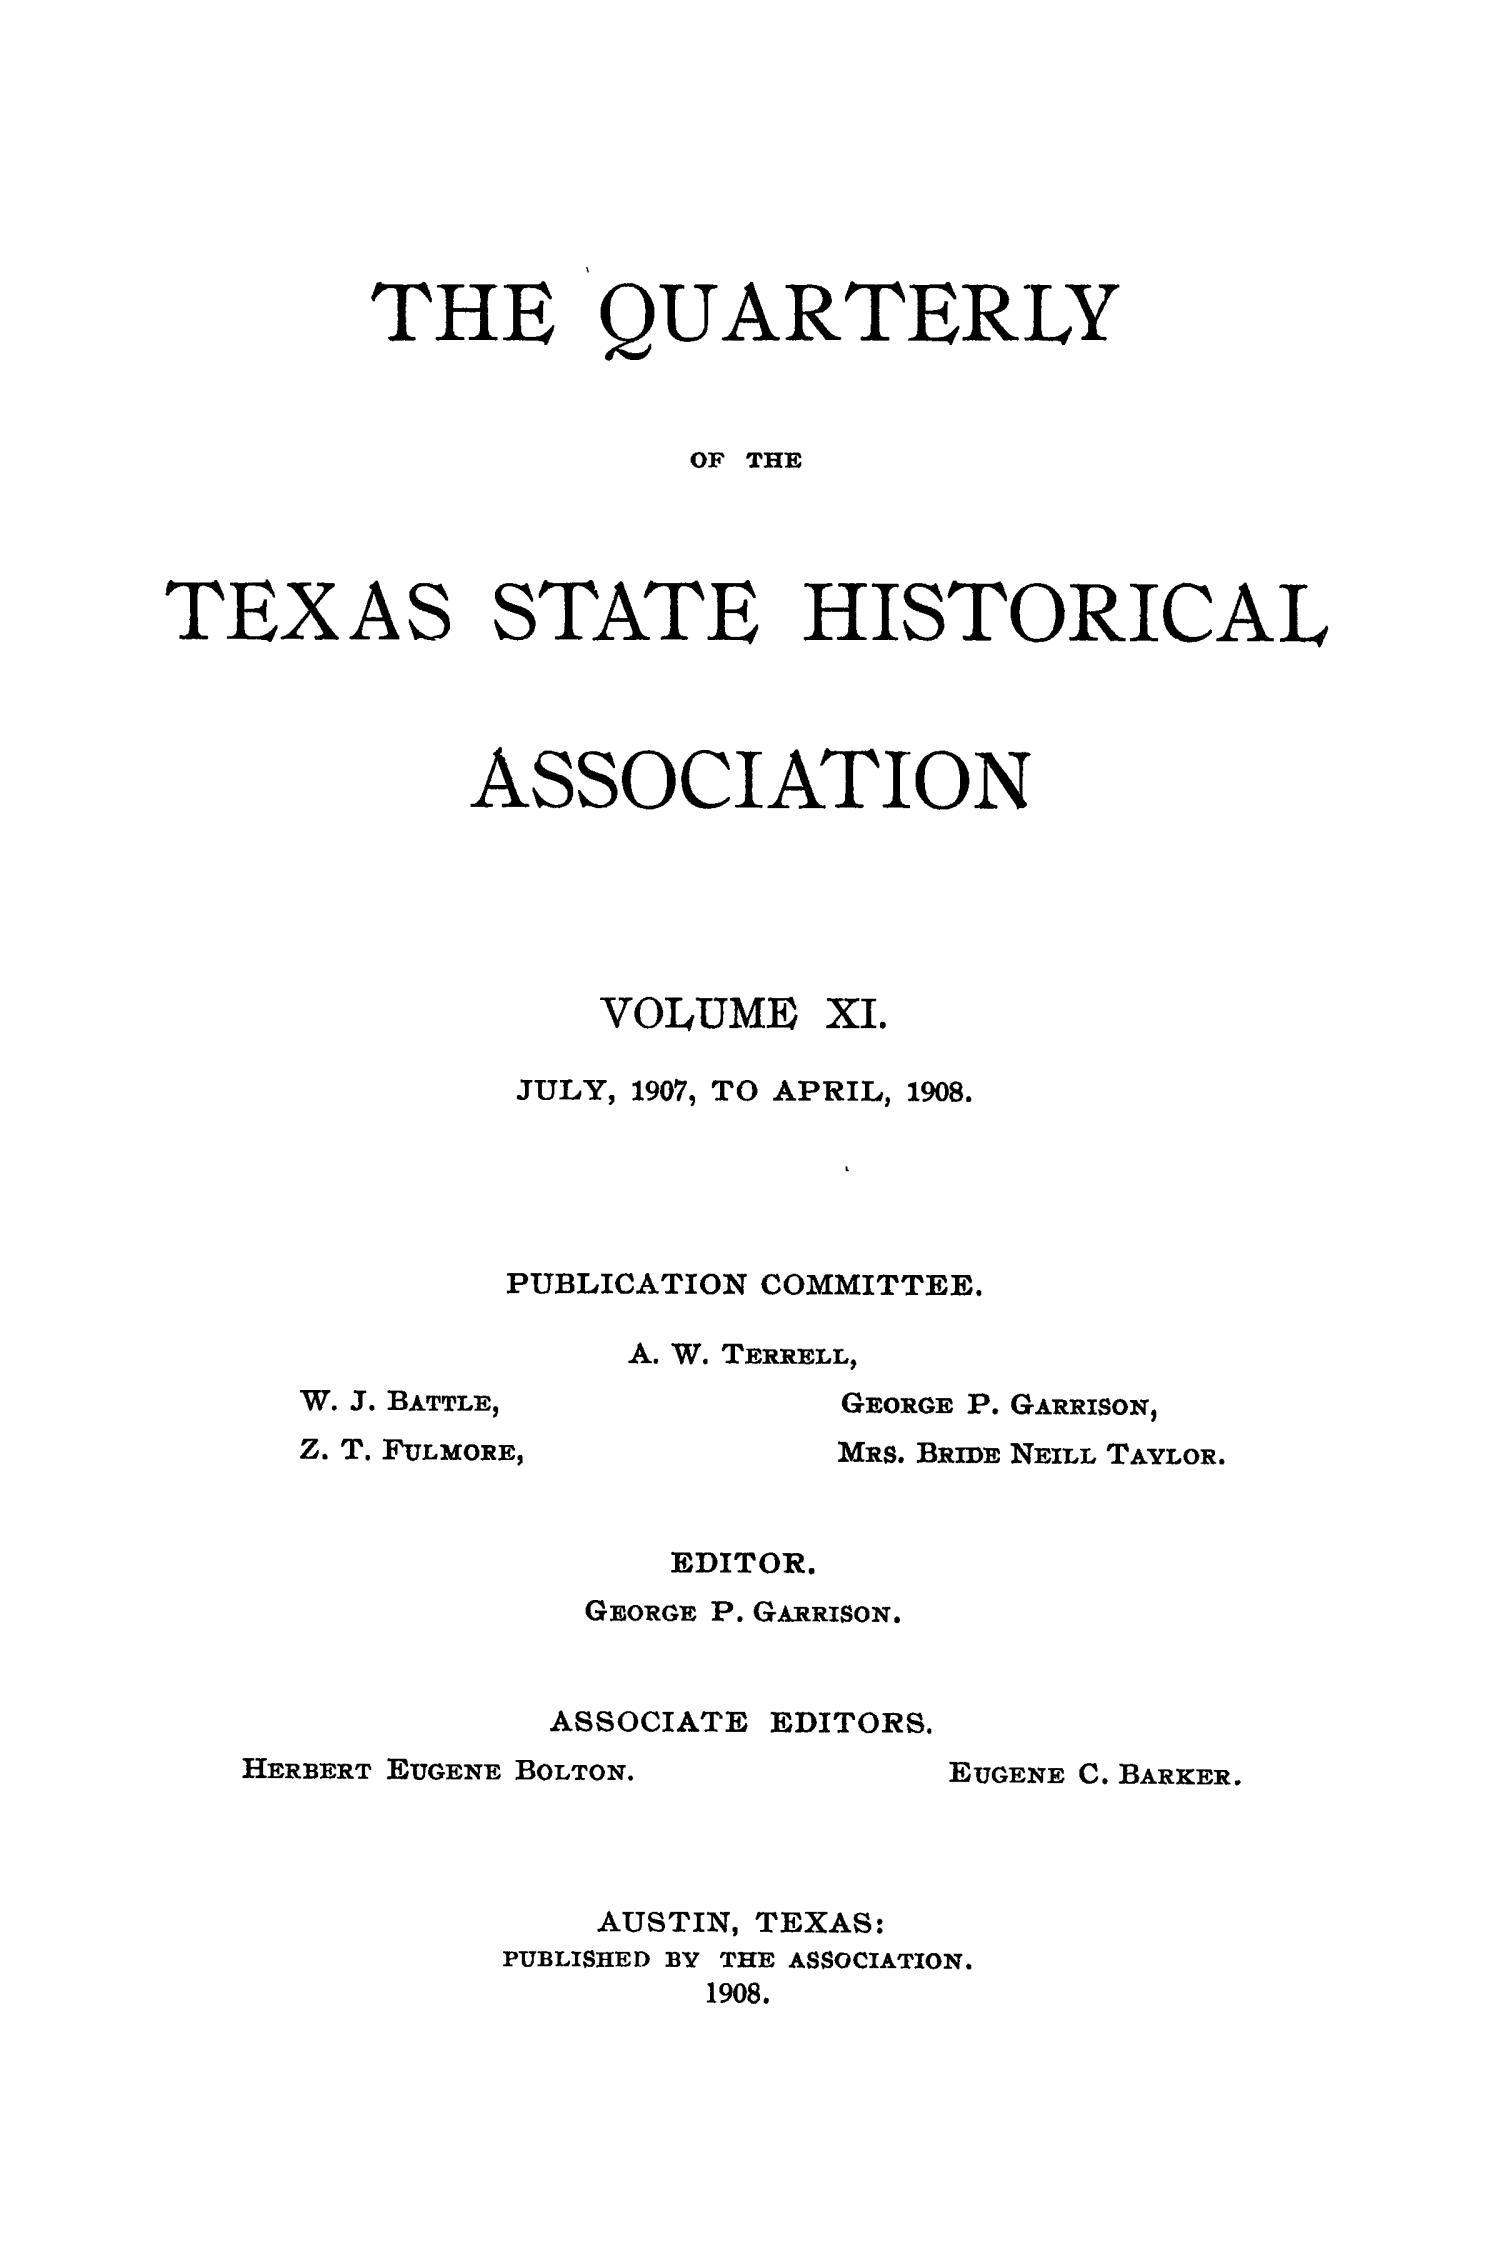 The Quarterly of the Texas State Historical Association, Volume 11, July 1907 - April, 1908
                                                
                                                    Front Cover
                                                